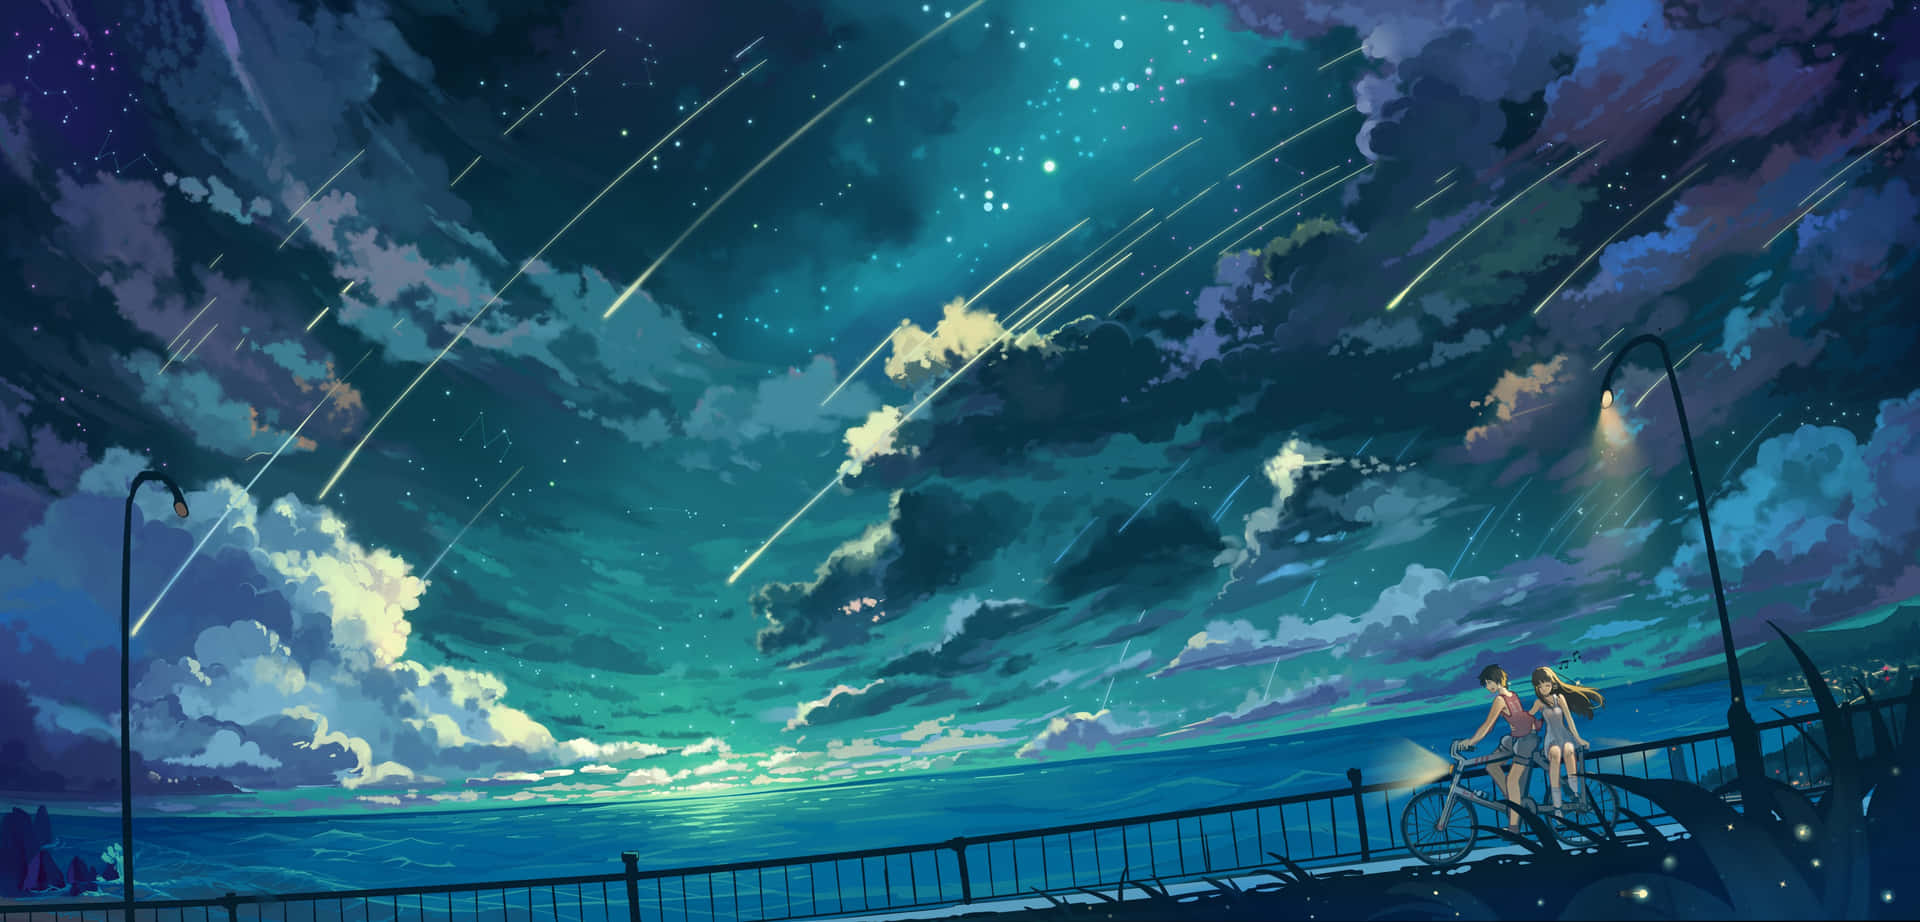 "Explore the depths of the beautiful Anime Sky"